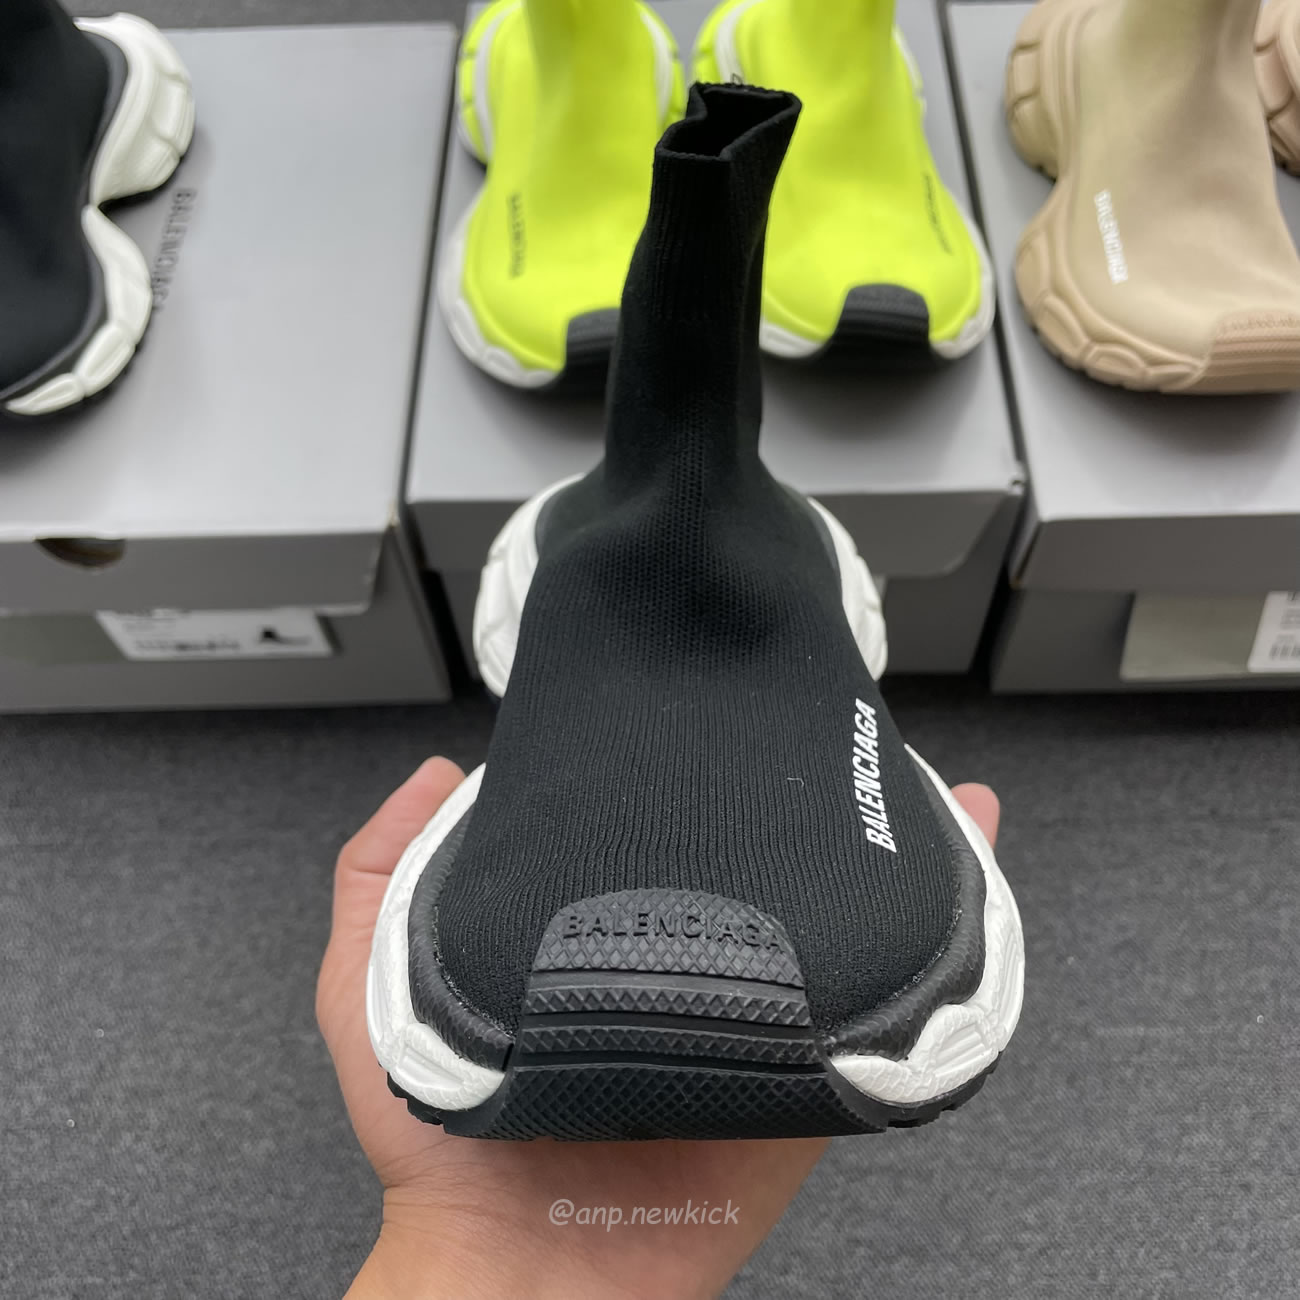 Balenciaga 3xl Sock Recycled Knit Sneakers Black White Fluo Yellow Beige (6) - newkick.org